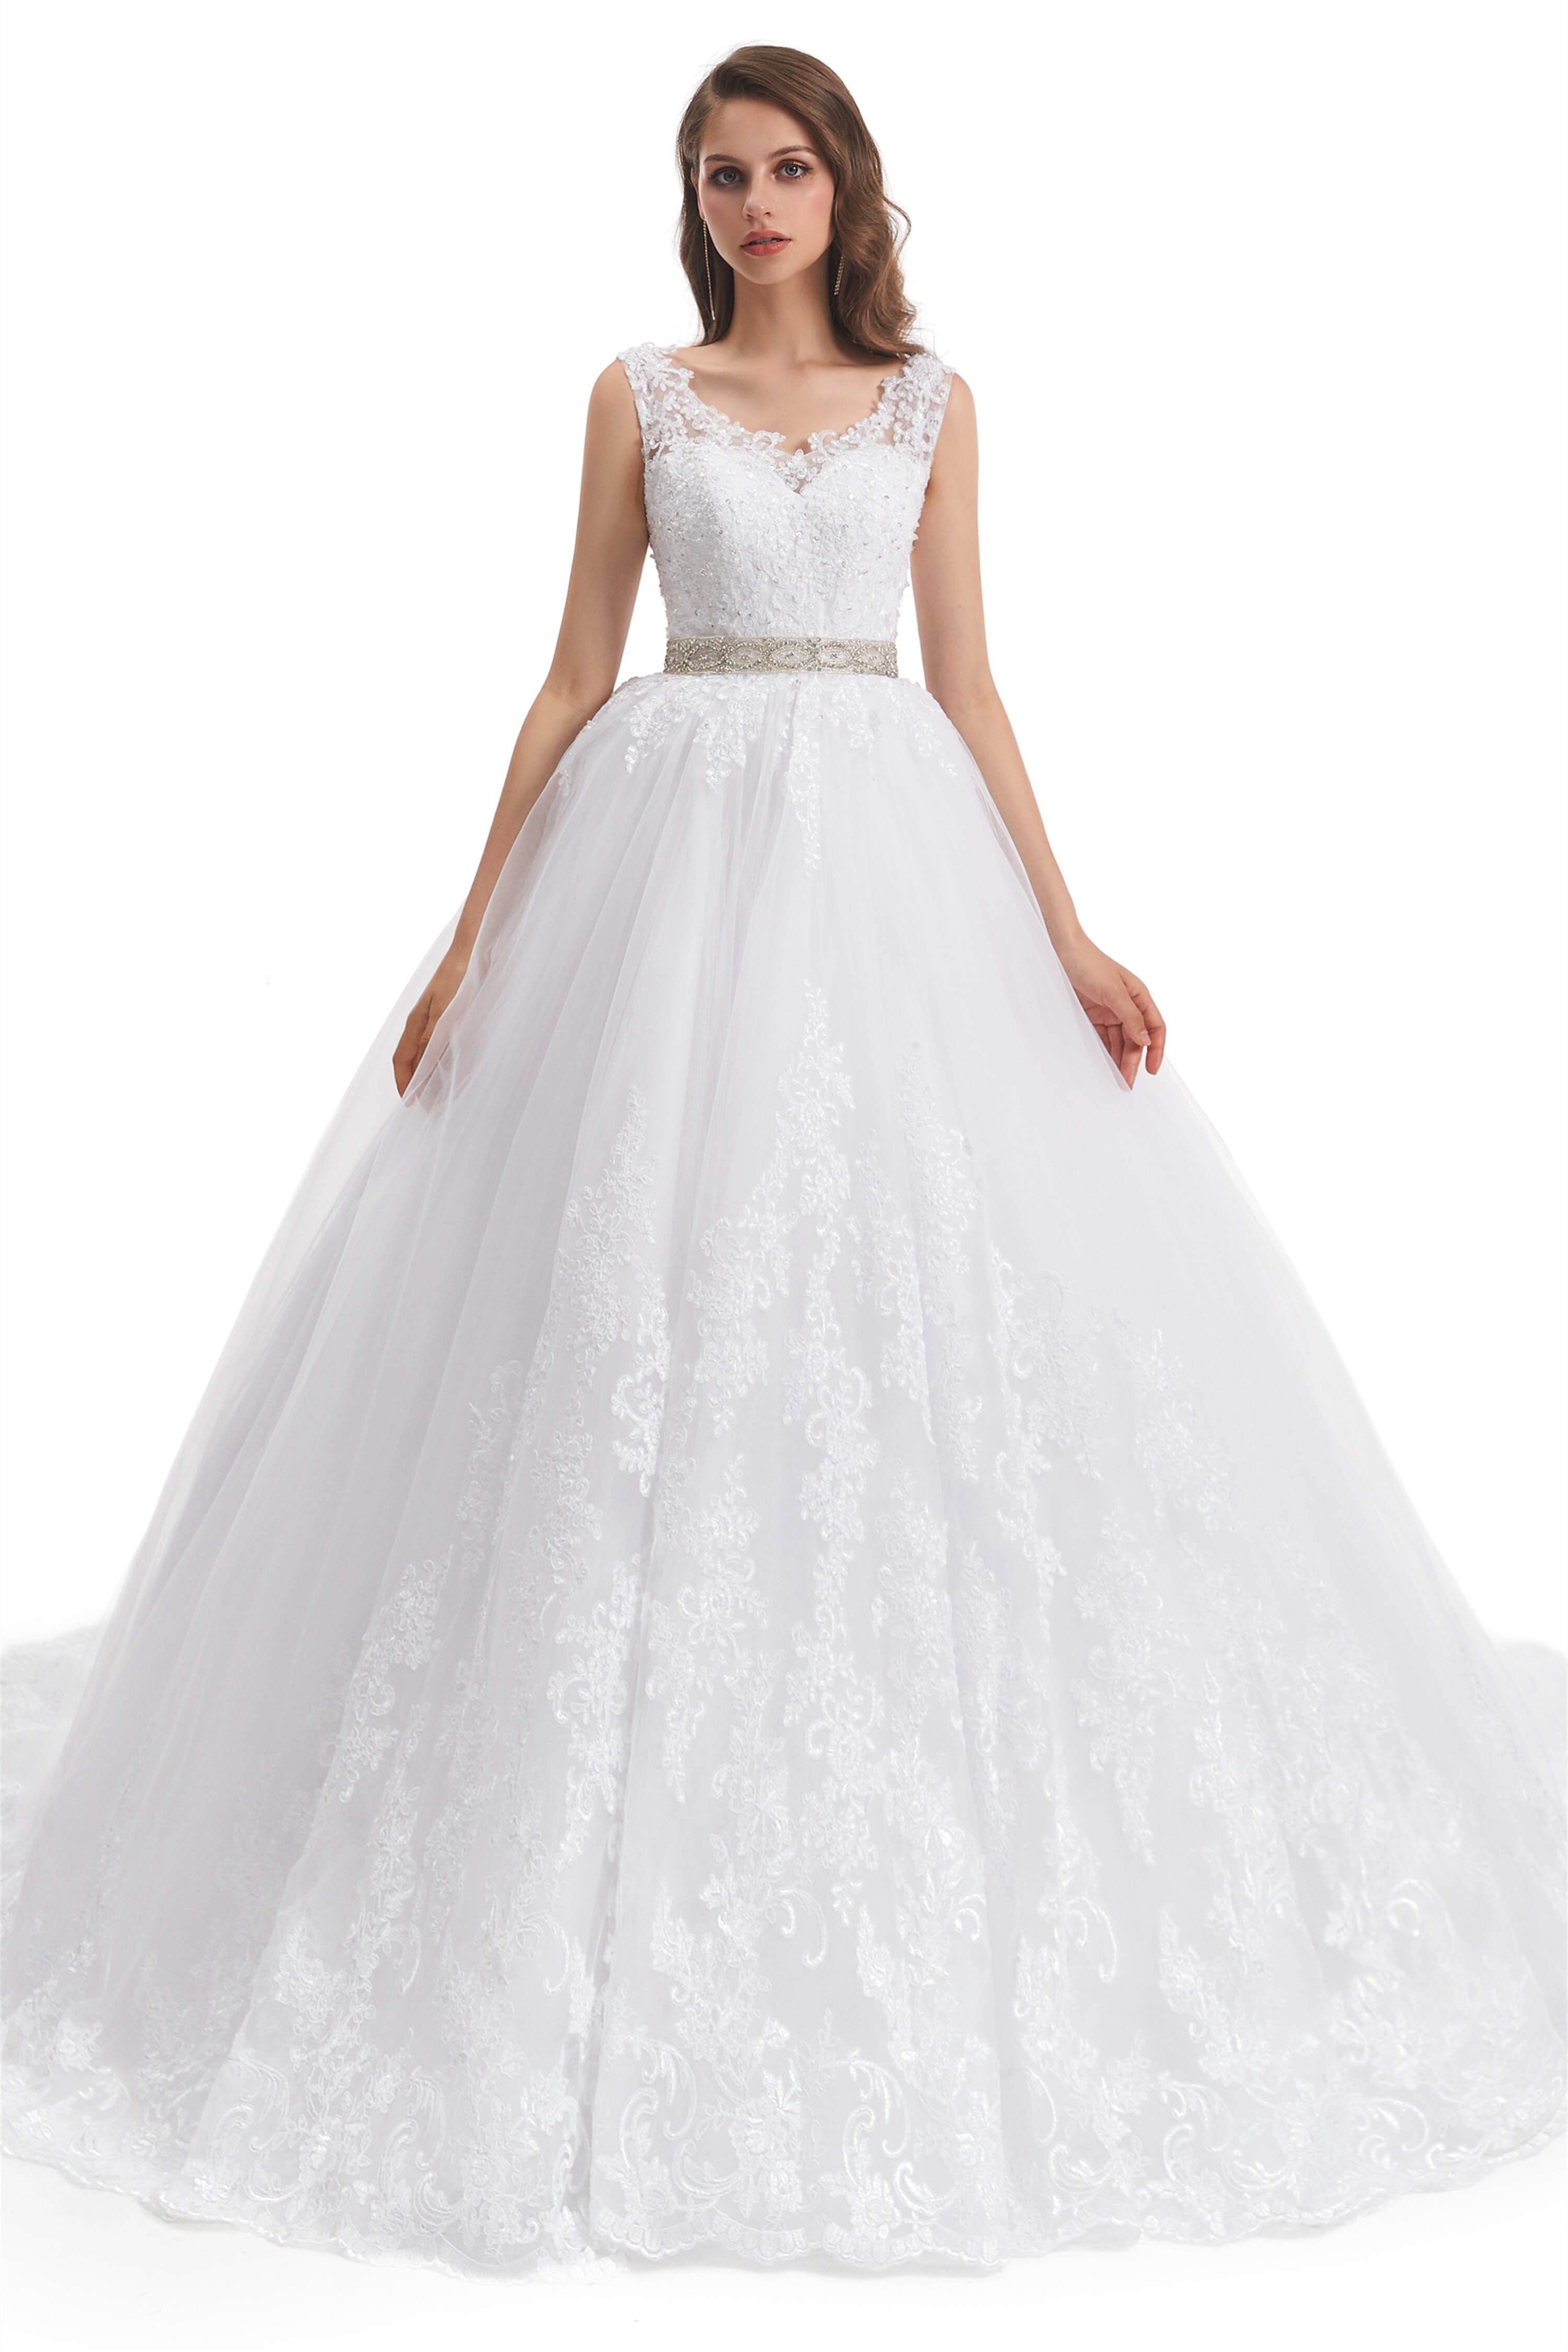 Tulle Backless Appliques beading Corset Wedding Dresses outfit, Wedding Dress Wedding Dress